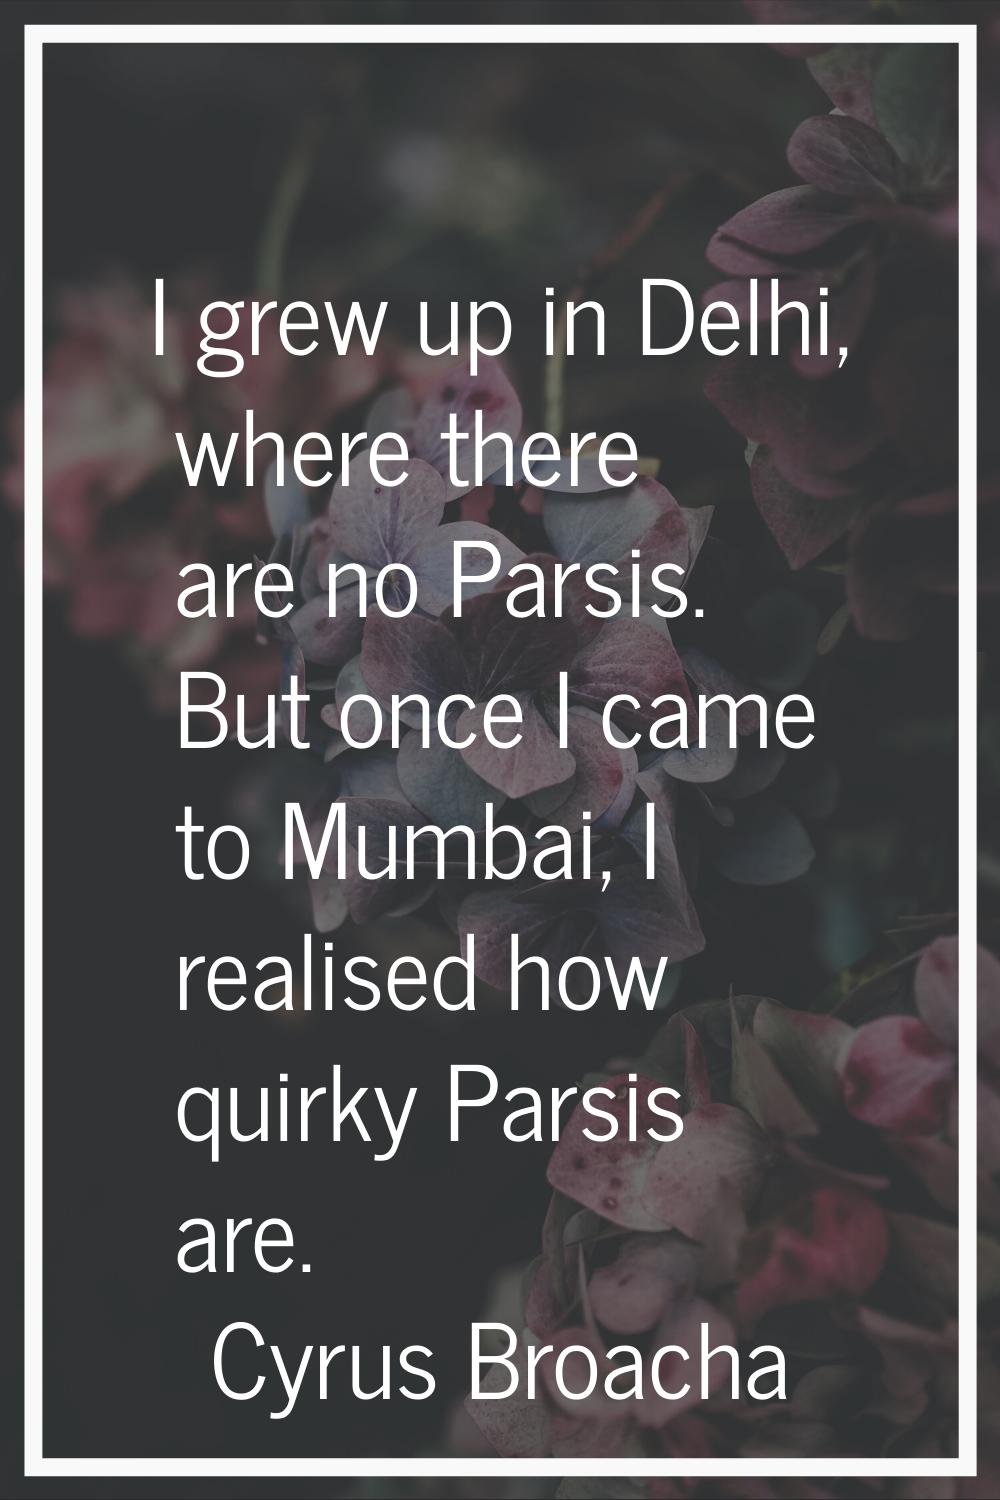 I grew up in Delhi, where there are no Parsis. But once I came to Mumbai, I realised how quirky Par